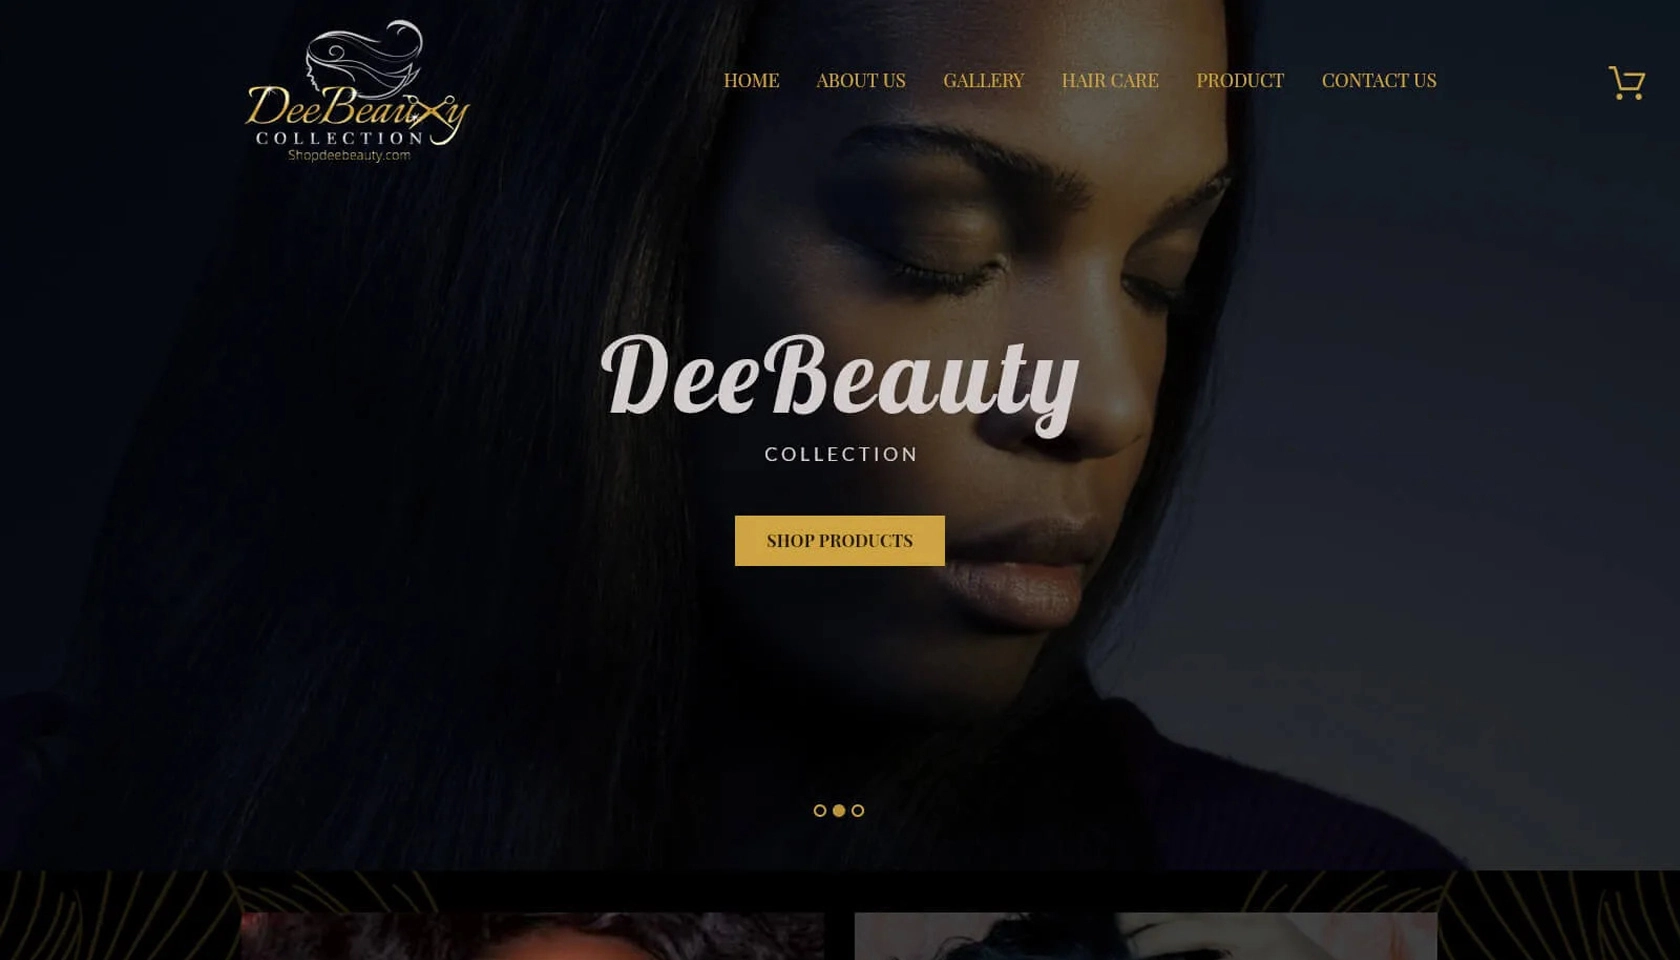 Dee Beauty Collection Website